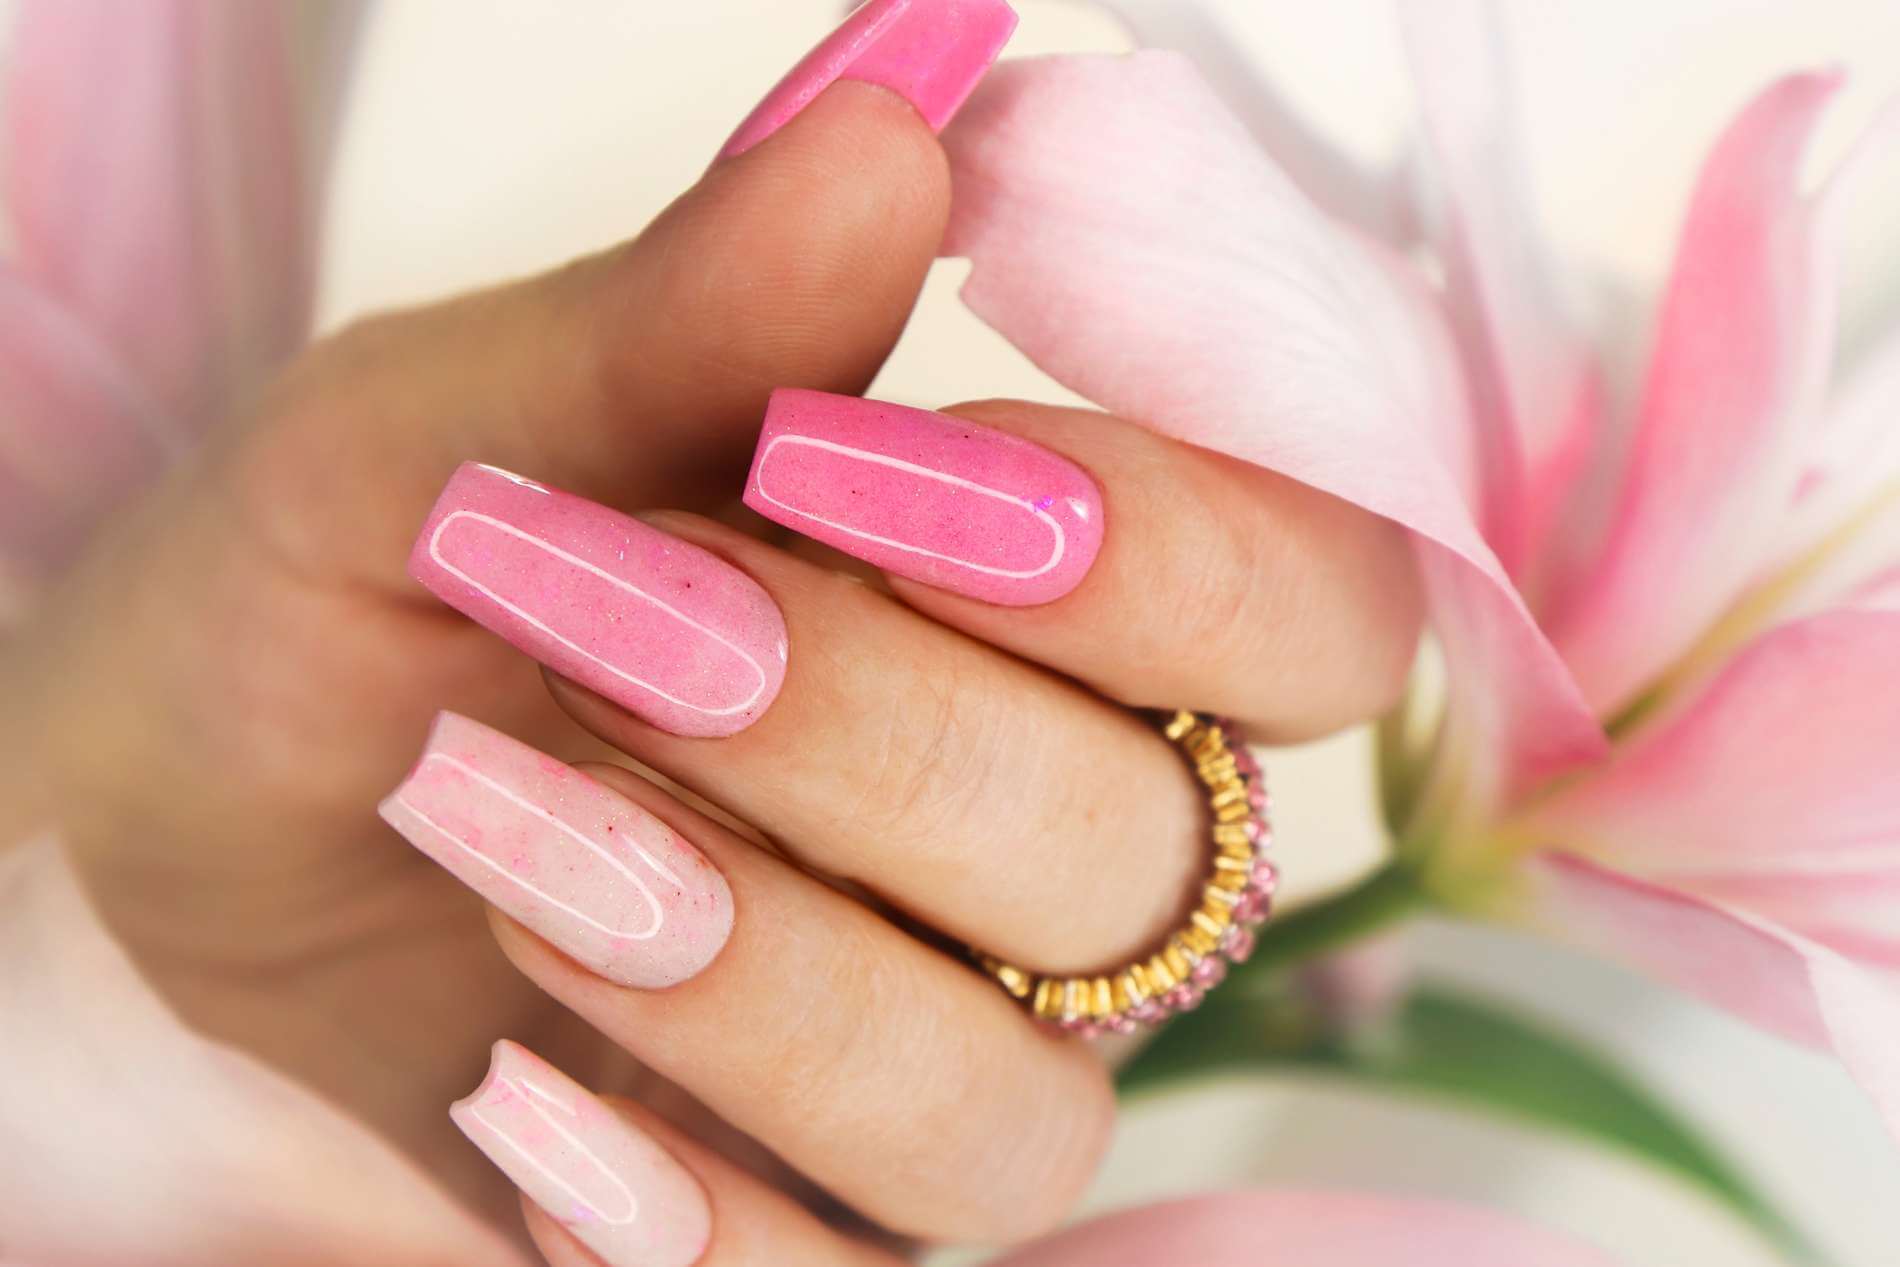 Get Gorgeous Acrylic Nails in Brooklyn NY Now!